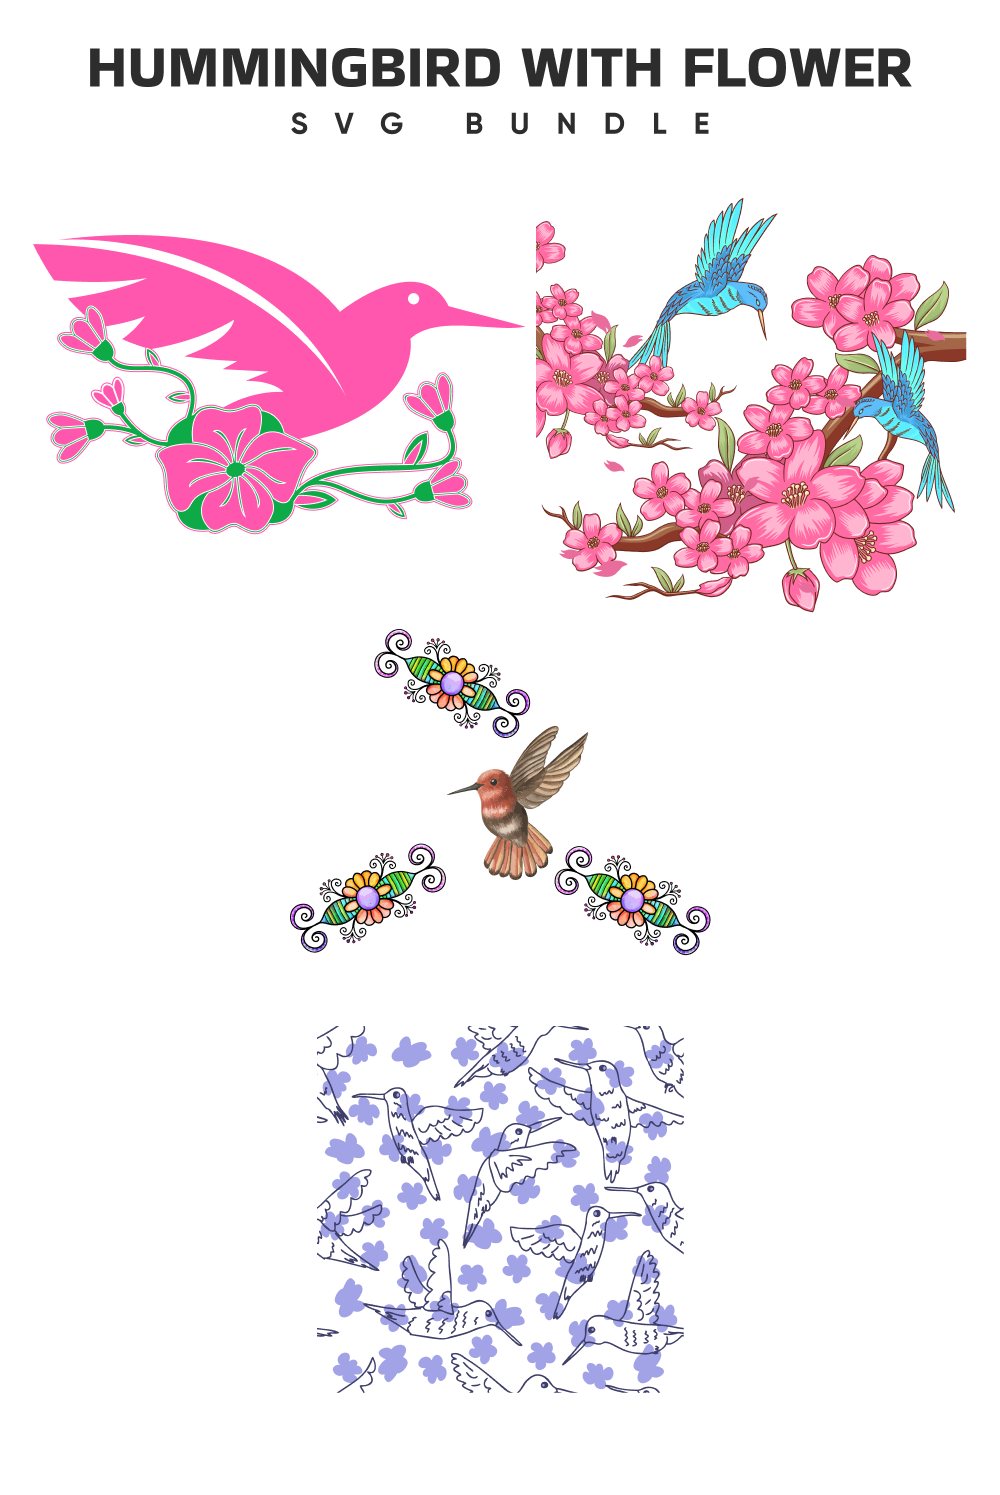 The hummingbird with the flower svg bundle.